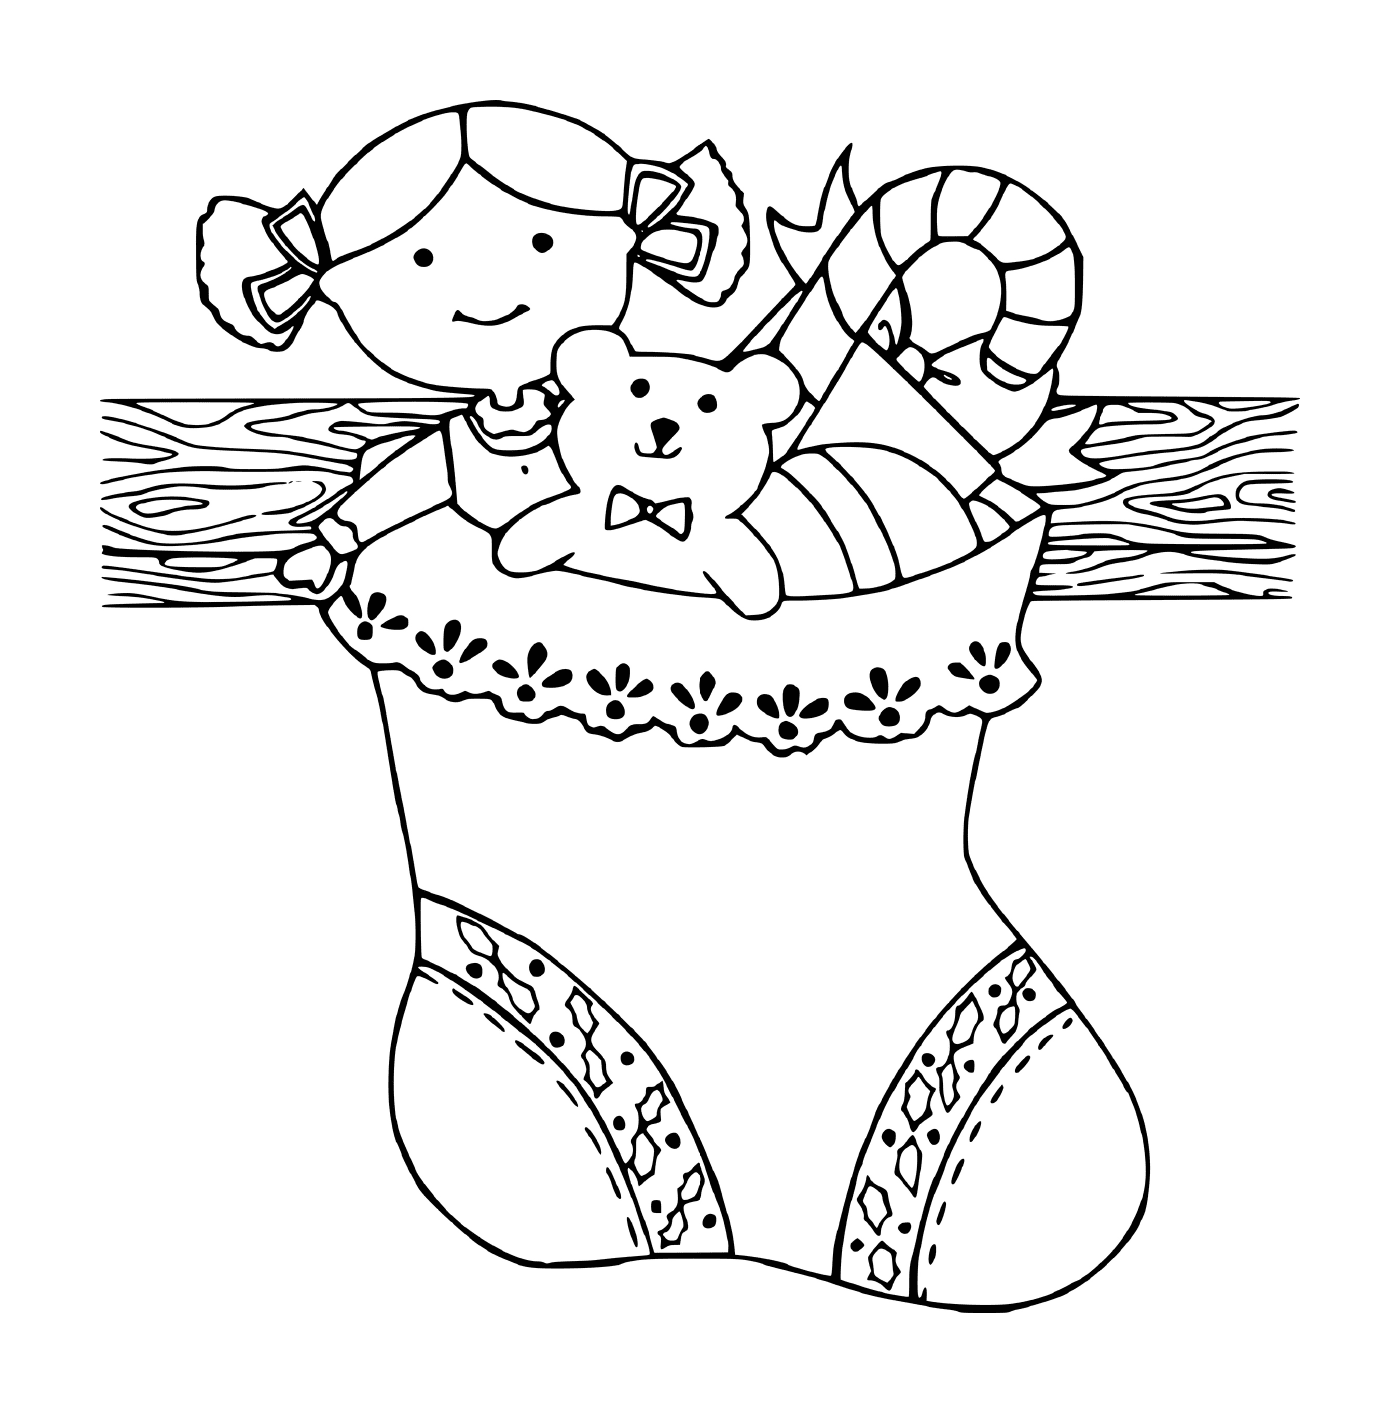  A doll and a teddy bear in a Christmas stockings on the mantle of the fireplace 